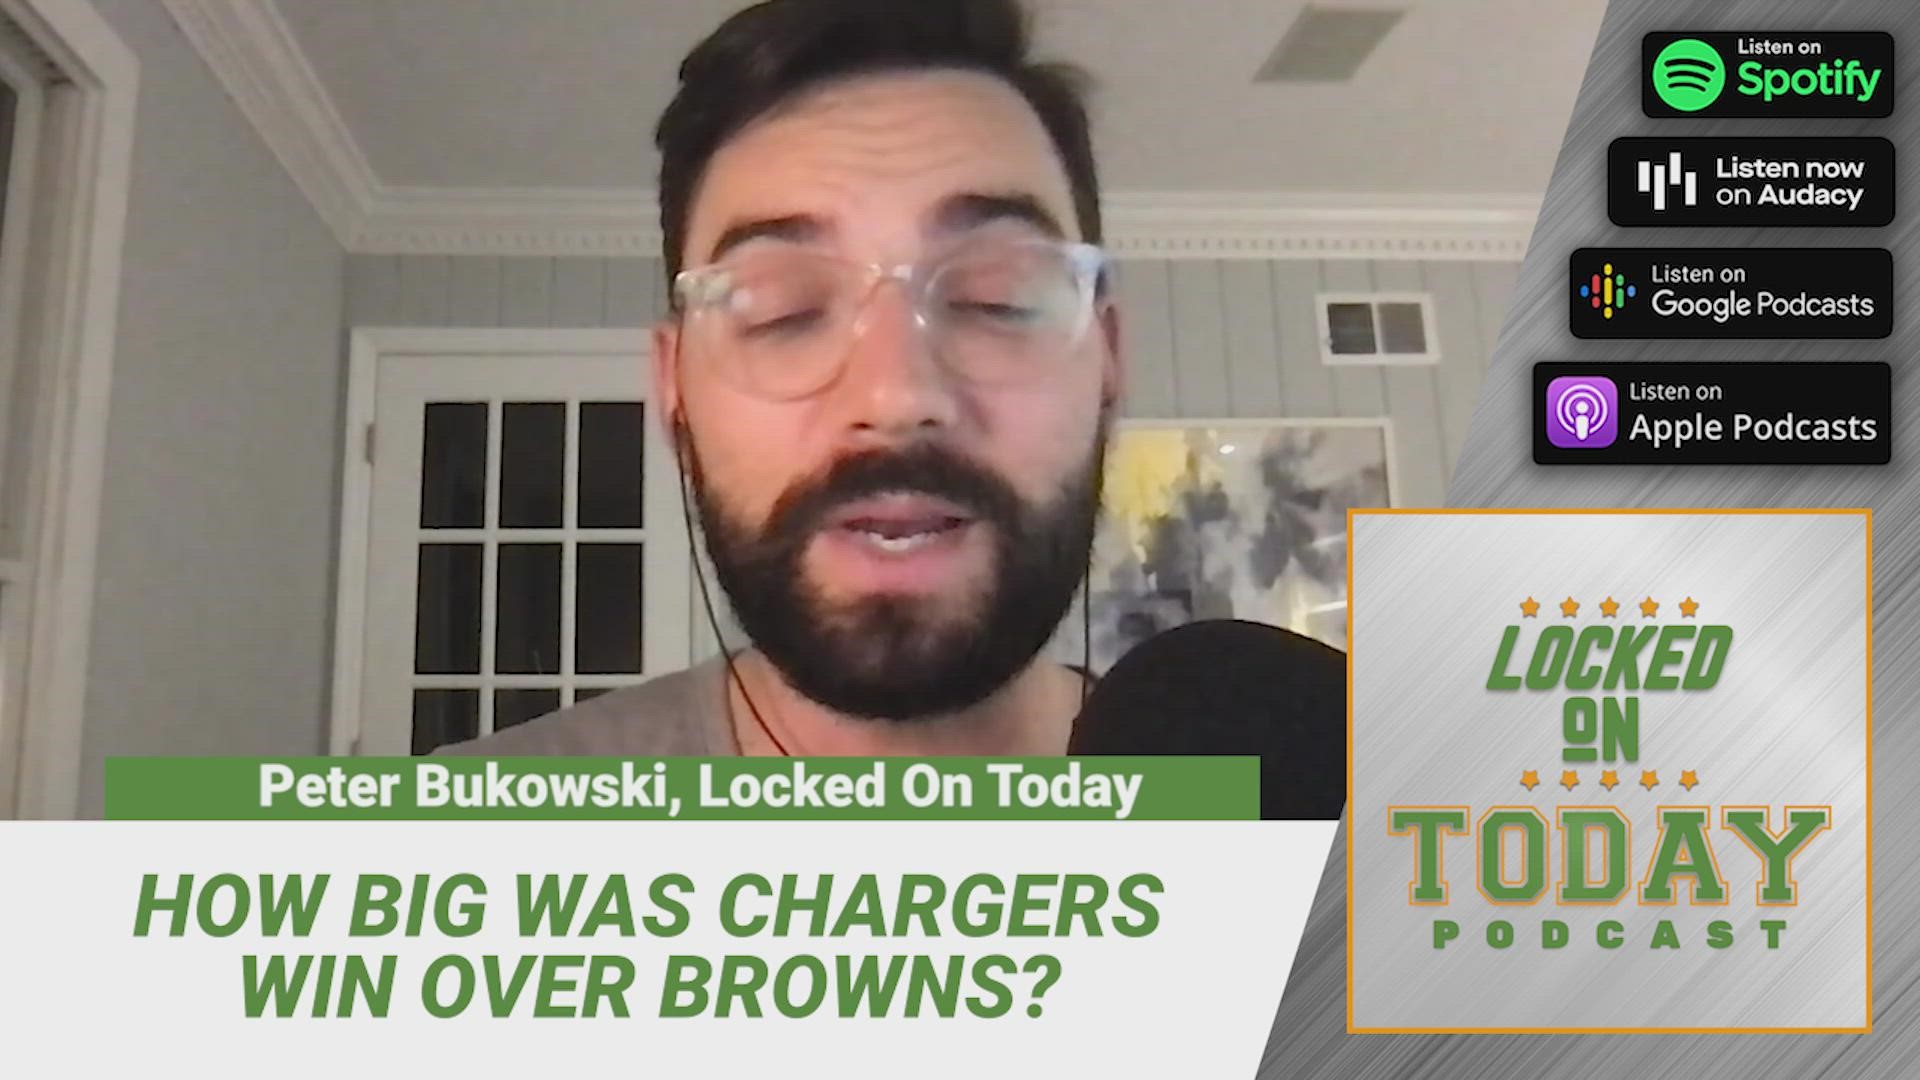 The Los Angeles Chargers pulled off a thrilling comeback win over the Browns to move to 4-1 on the year. How important was Sunday's win?